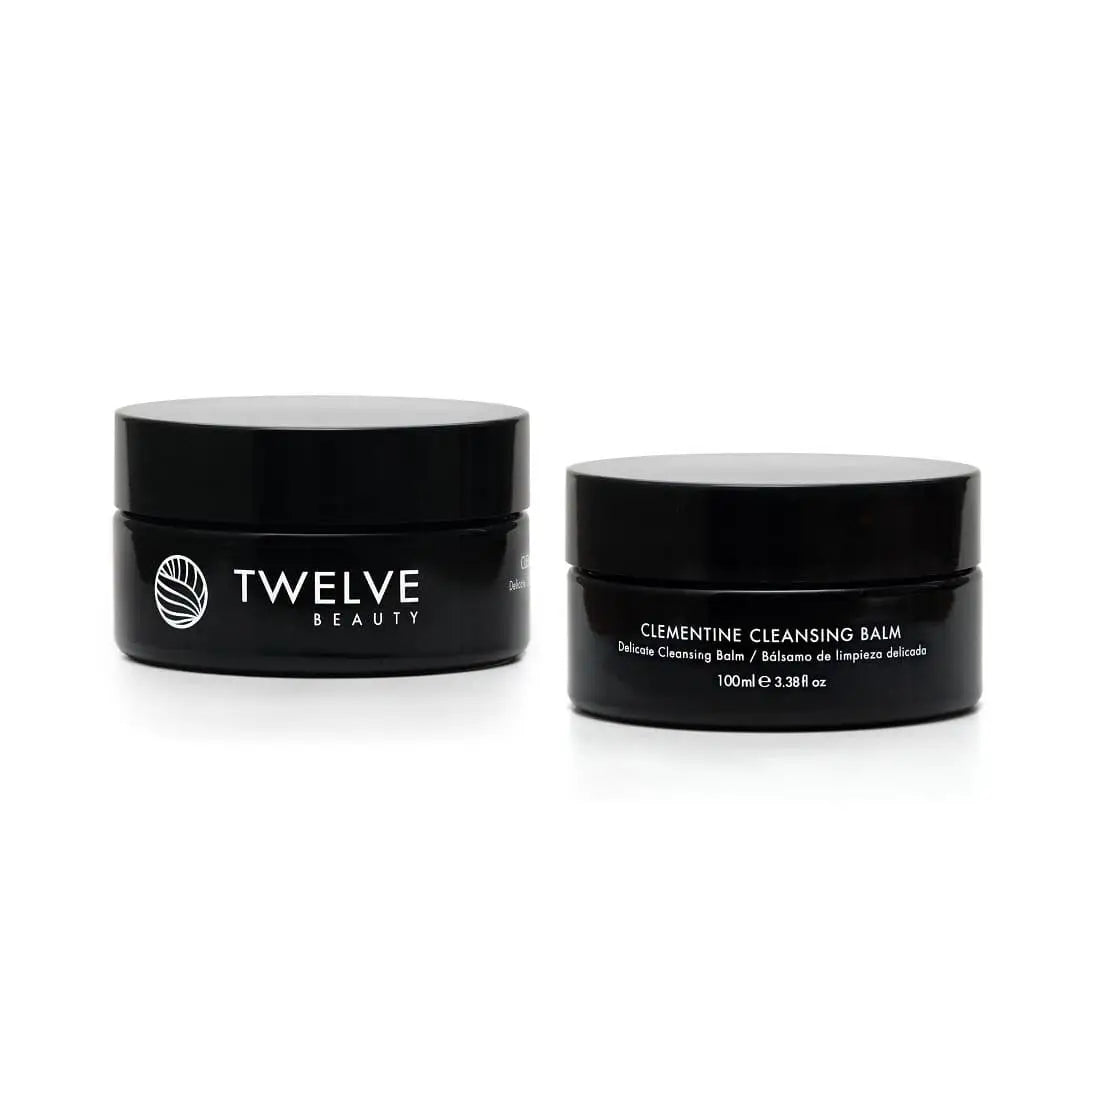 Twelve Beauty Clementine Cleansing Balm 100ml